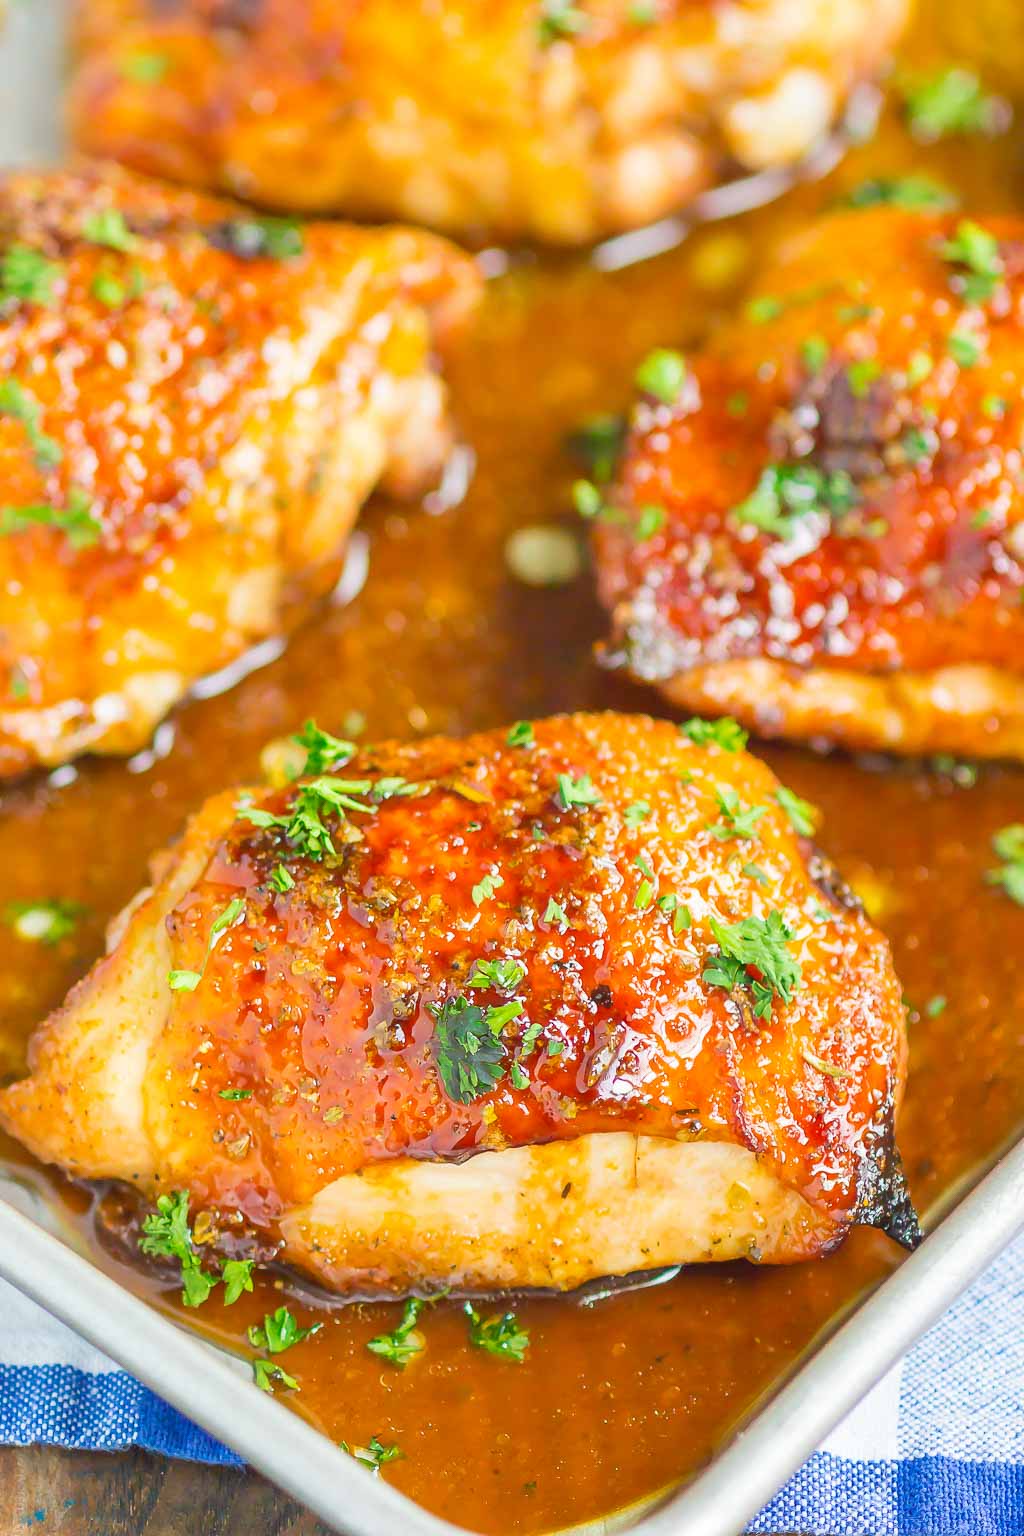 How To Make Balsamic Braised Chicken With Honey